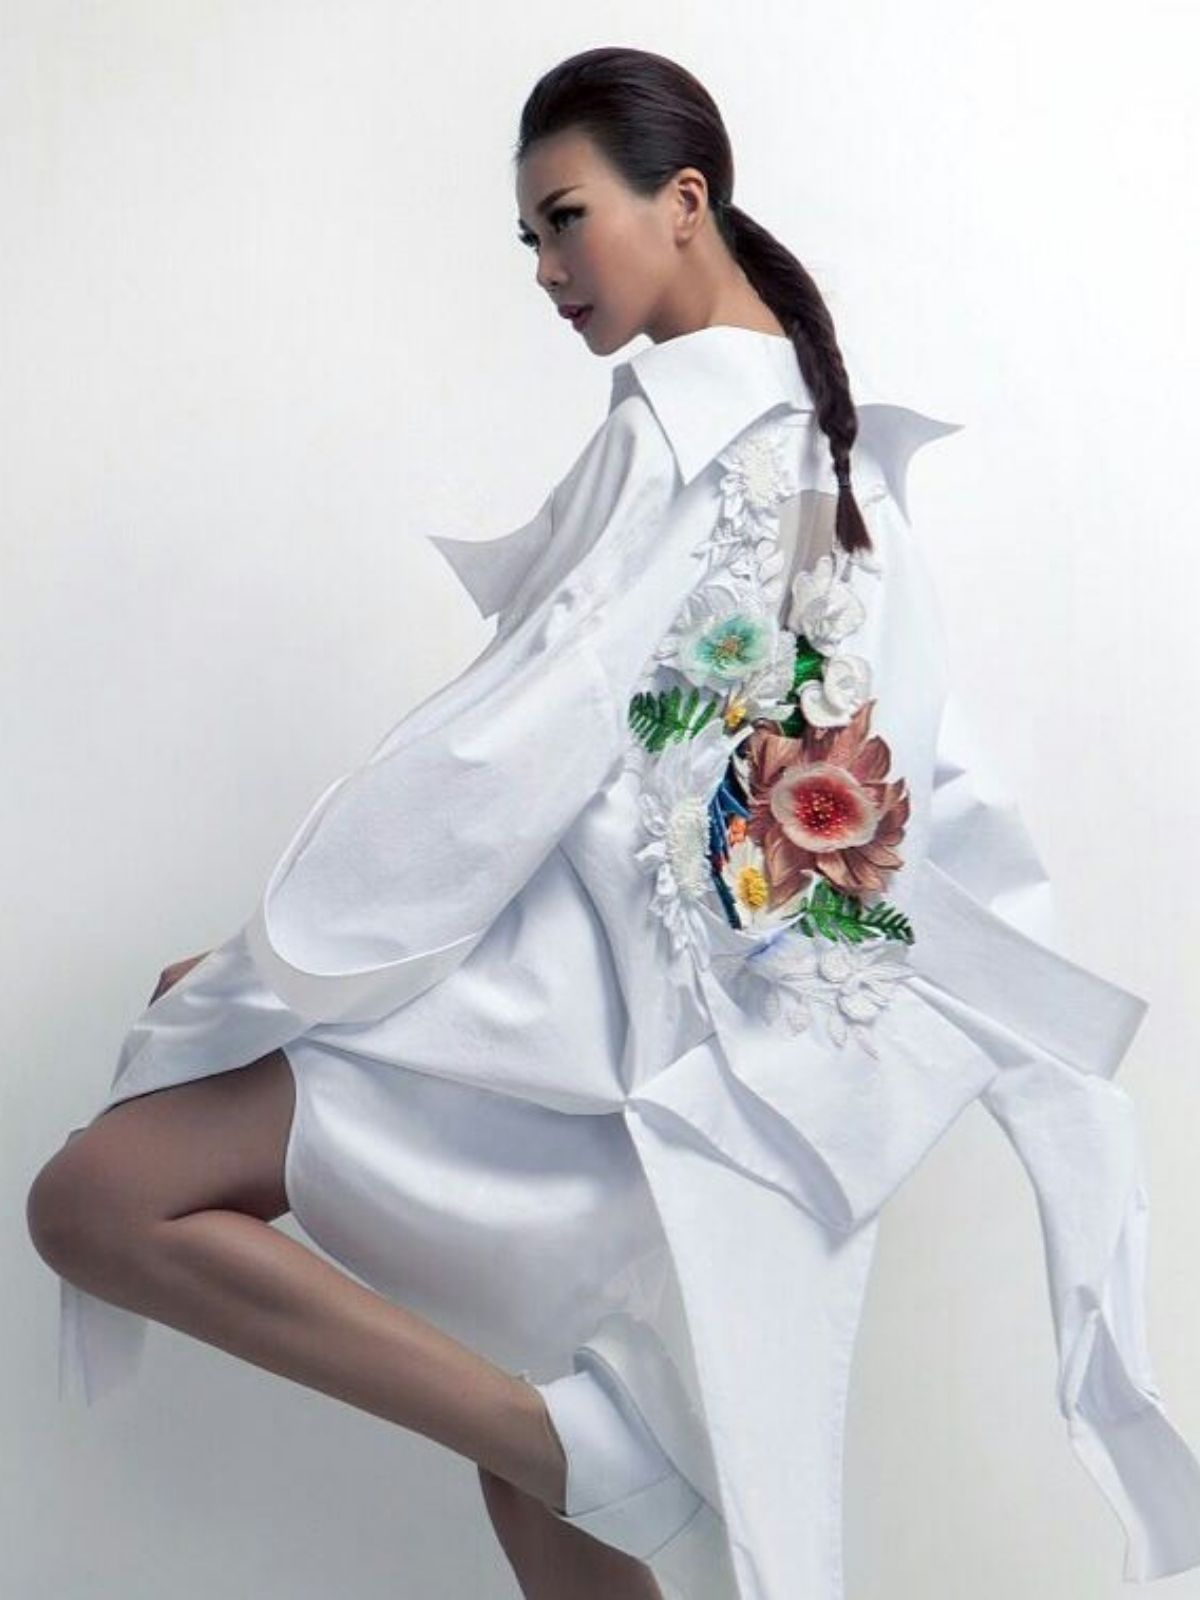 model with white blouse and embroided flowers - nguyen cong tri on thursd